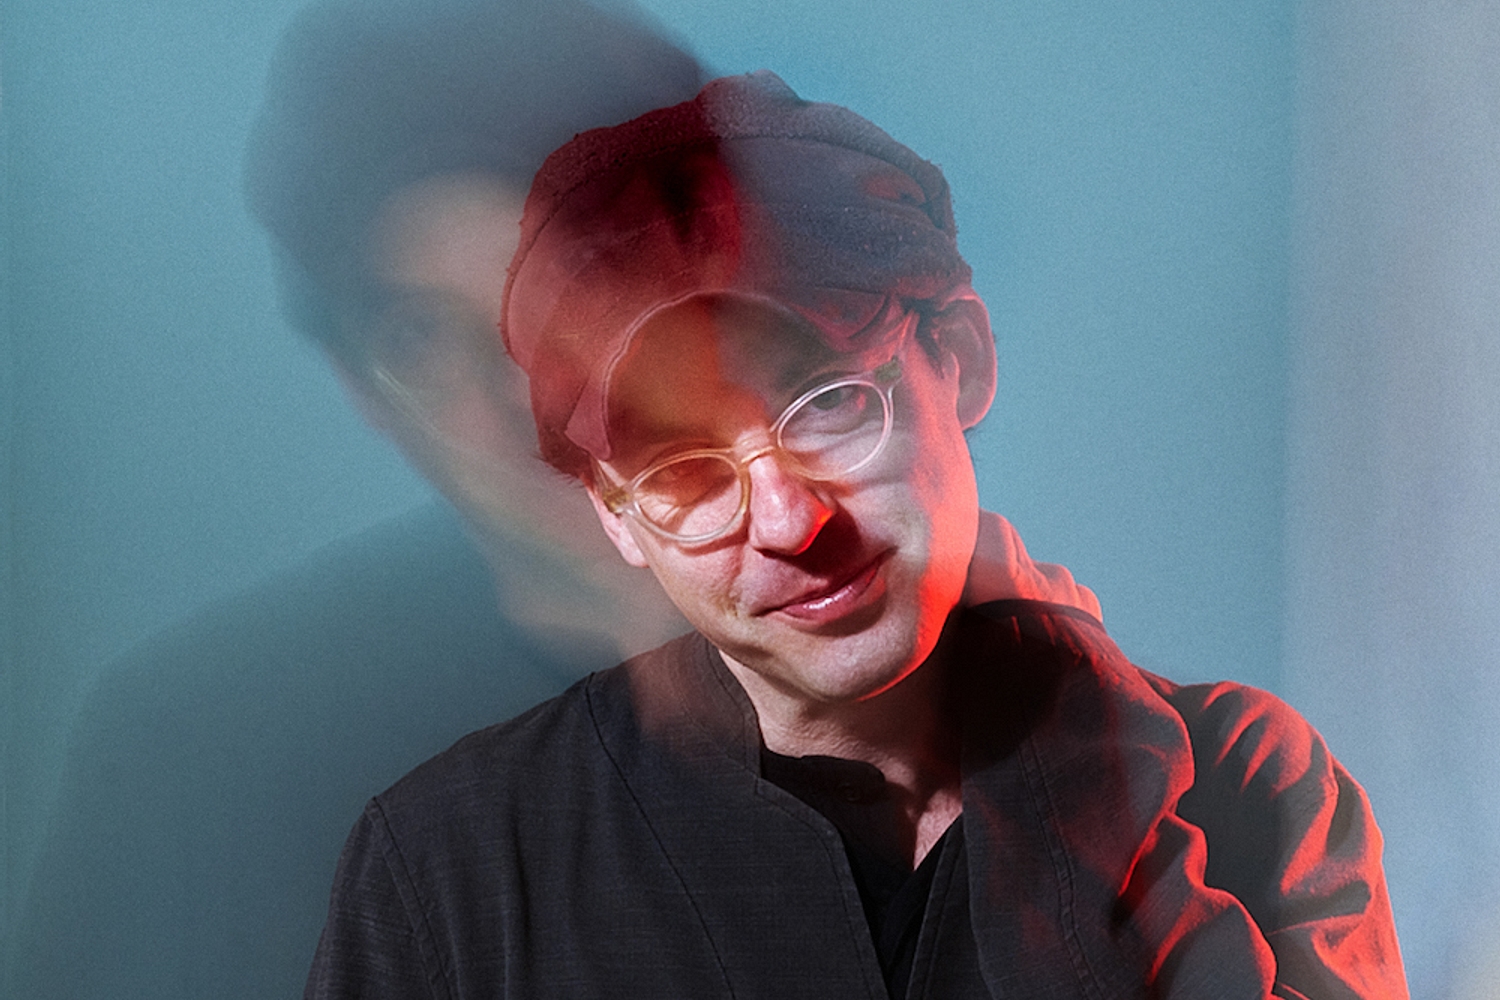 Clap Your Hands Say Yeah release new single ‘Where They Perform Miracles’